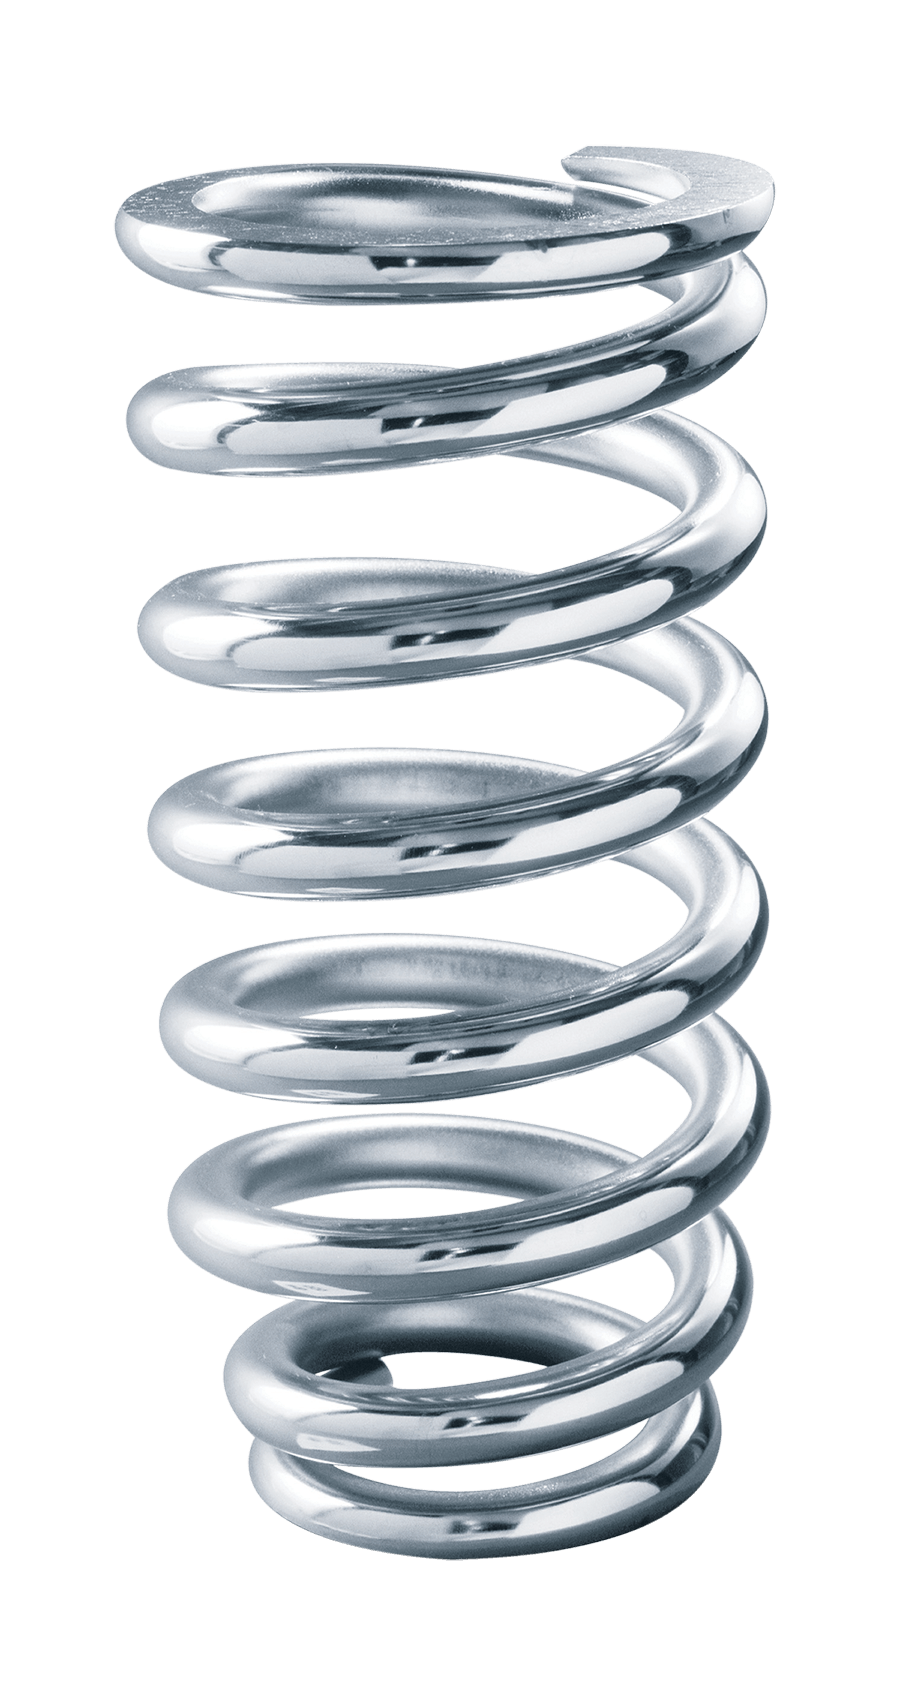 QA1 8MB500 Spring Chrome Silicon 3-1/2 Id 8-500 Lbs Chrome Plated 1St Coil Tapered